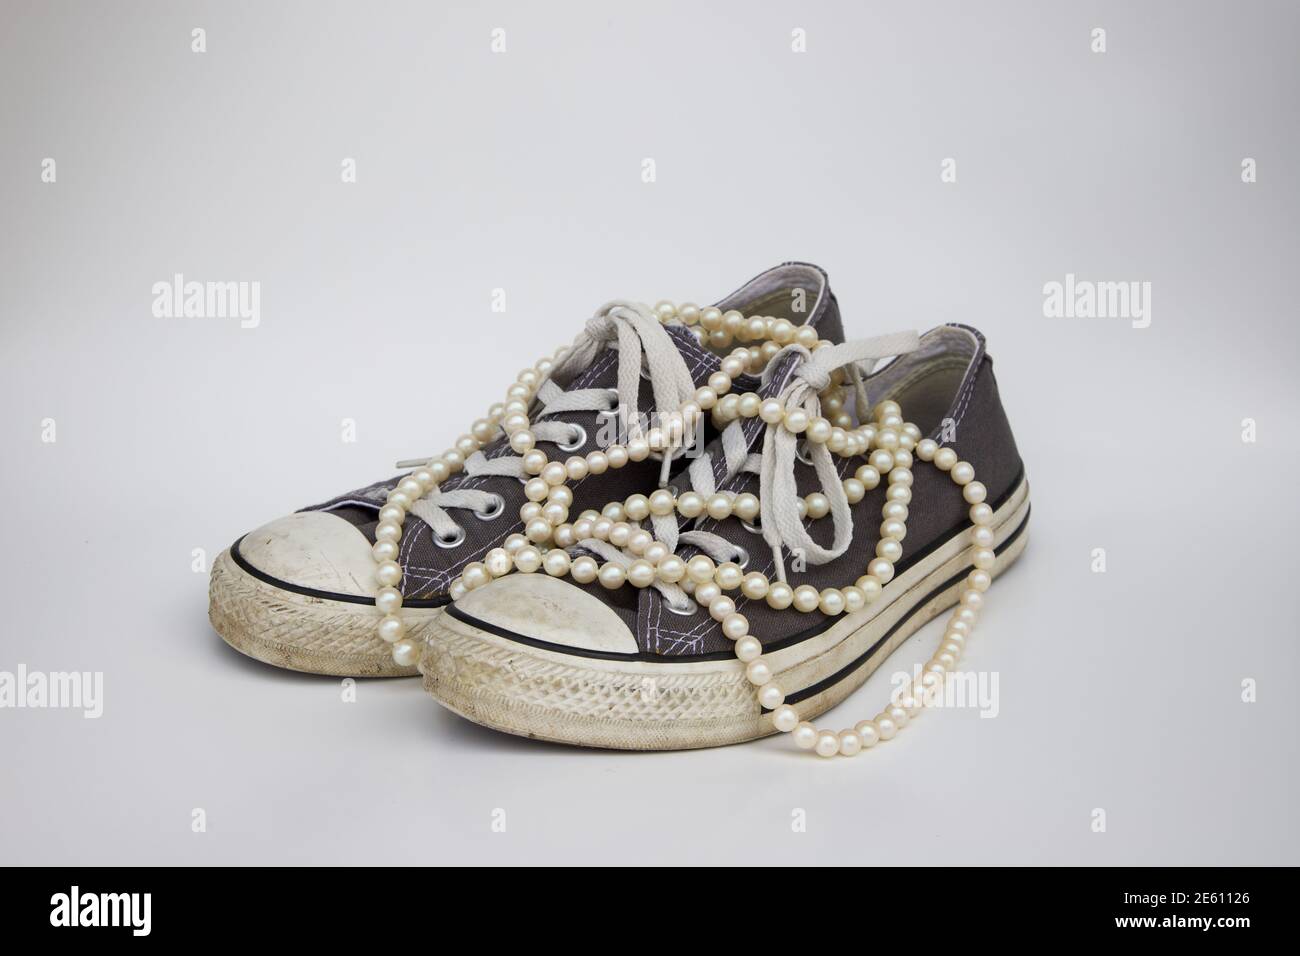 Chucks and Pearls 2021 with copy space Stock Photo